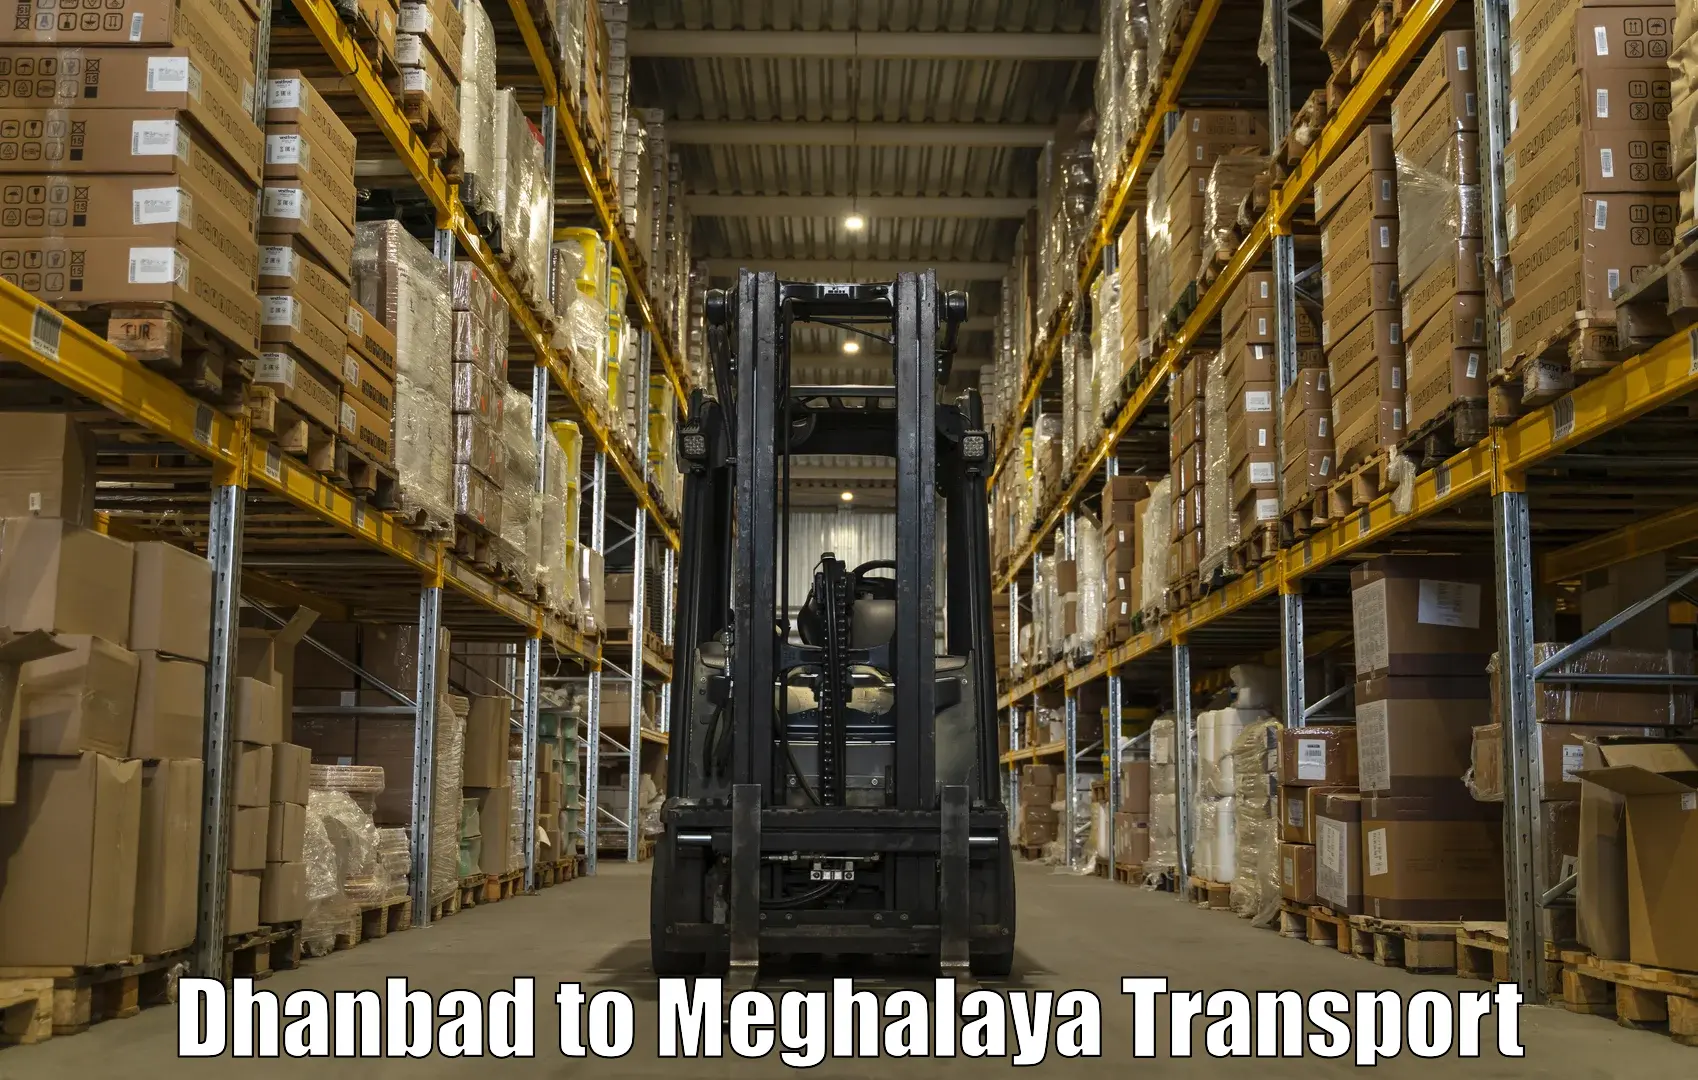 Air freight transport services in Dhanbad to Tikrikilla